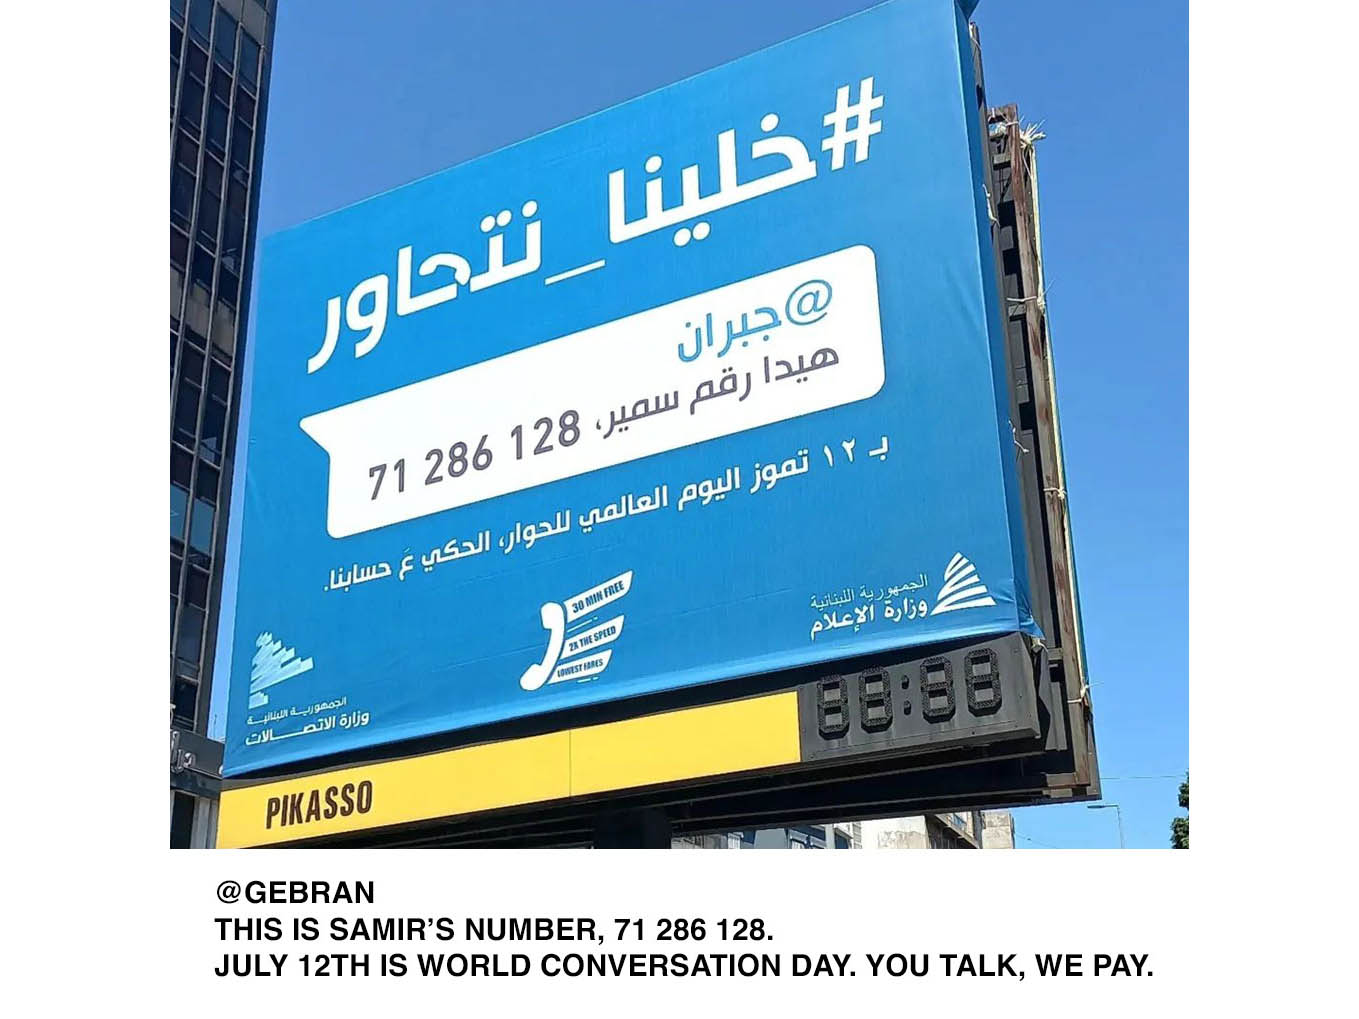 Lebanon's Ministry of Telecommunications and Information embark Lebanese on a journey of meaningful conversation through 'Khalina Nethawar' campaign